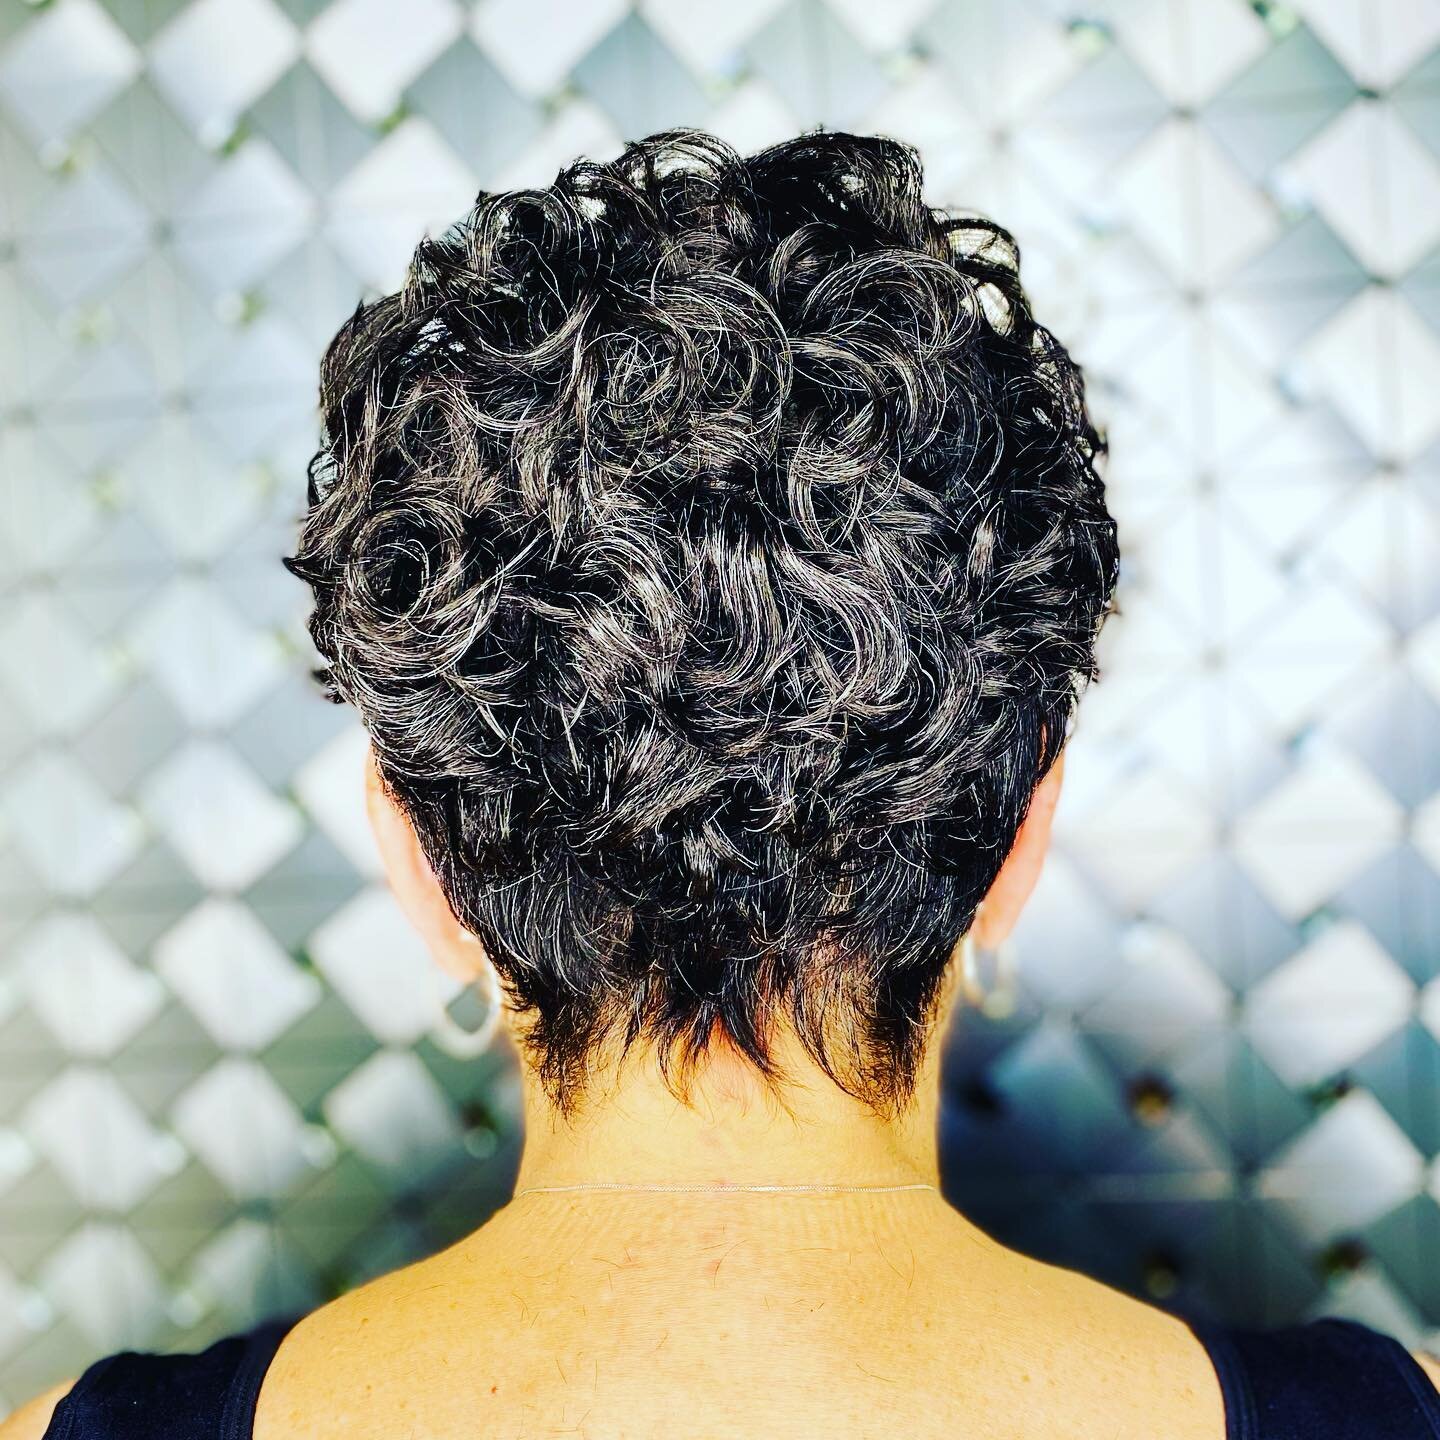 A Soft, Feminine Hairline to Enhance her Waves!🥰&hellip;This is your Beautiful Mom Heather @vi.vicious711 😉&hellip;
such a pleasure meeting her and working with her Curls 😘💕 

#VMACurls #DualCertified
#Rezocut #Devacut #curlycut #mastercolorist #